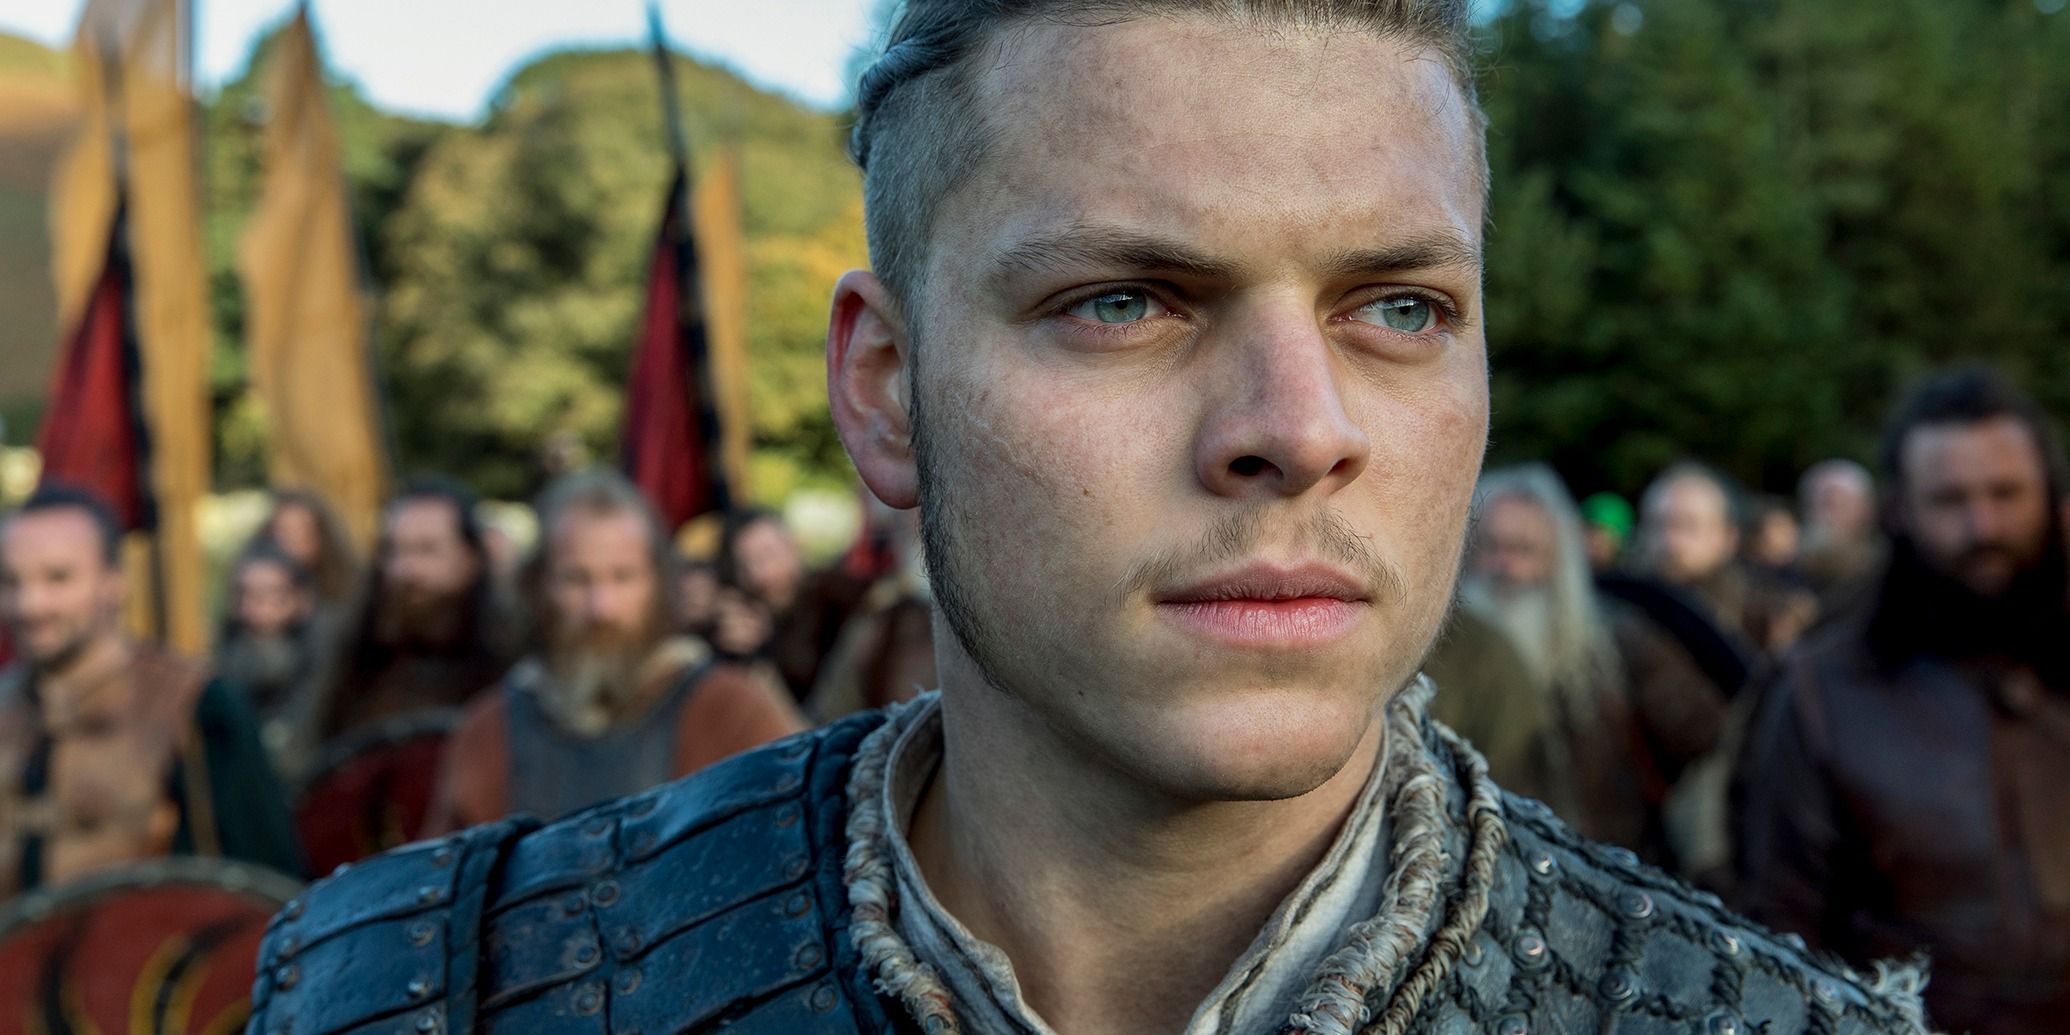 Vikings-Ivar with the Frankish Army-